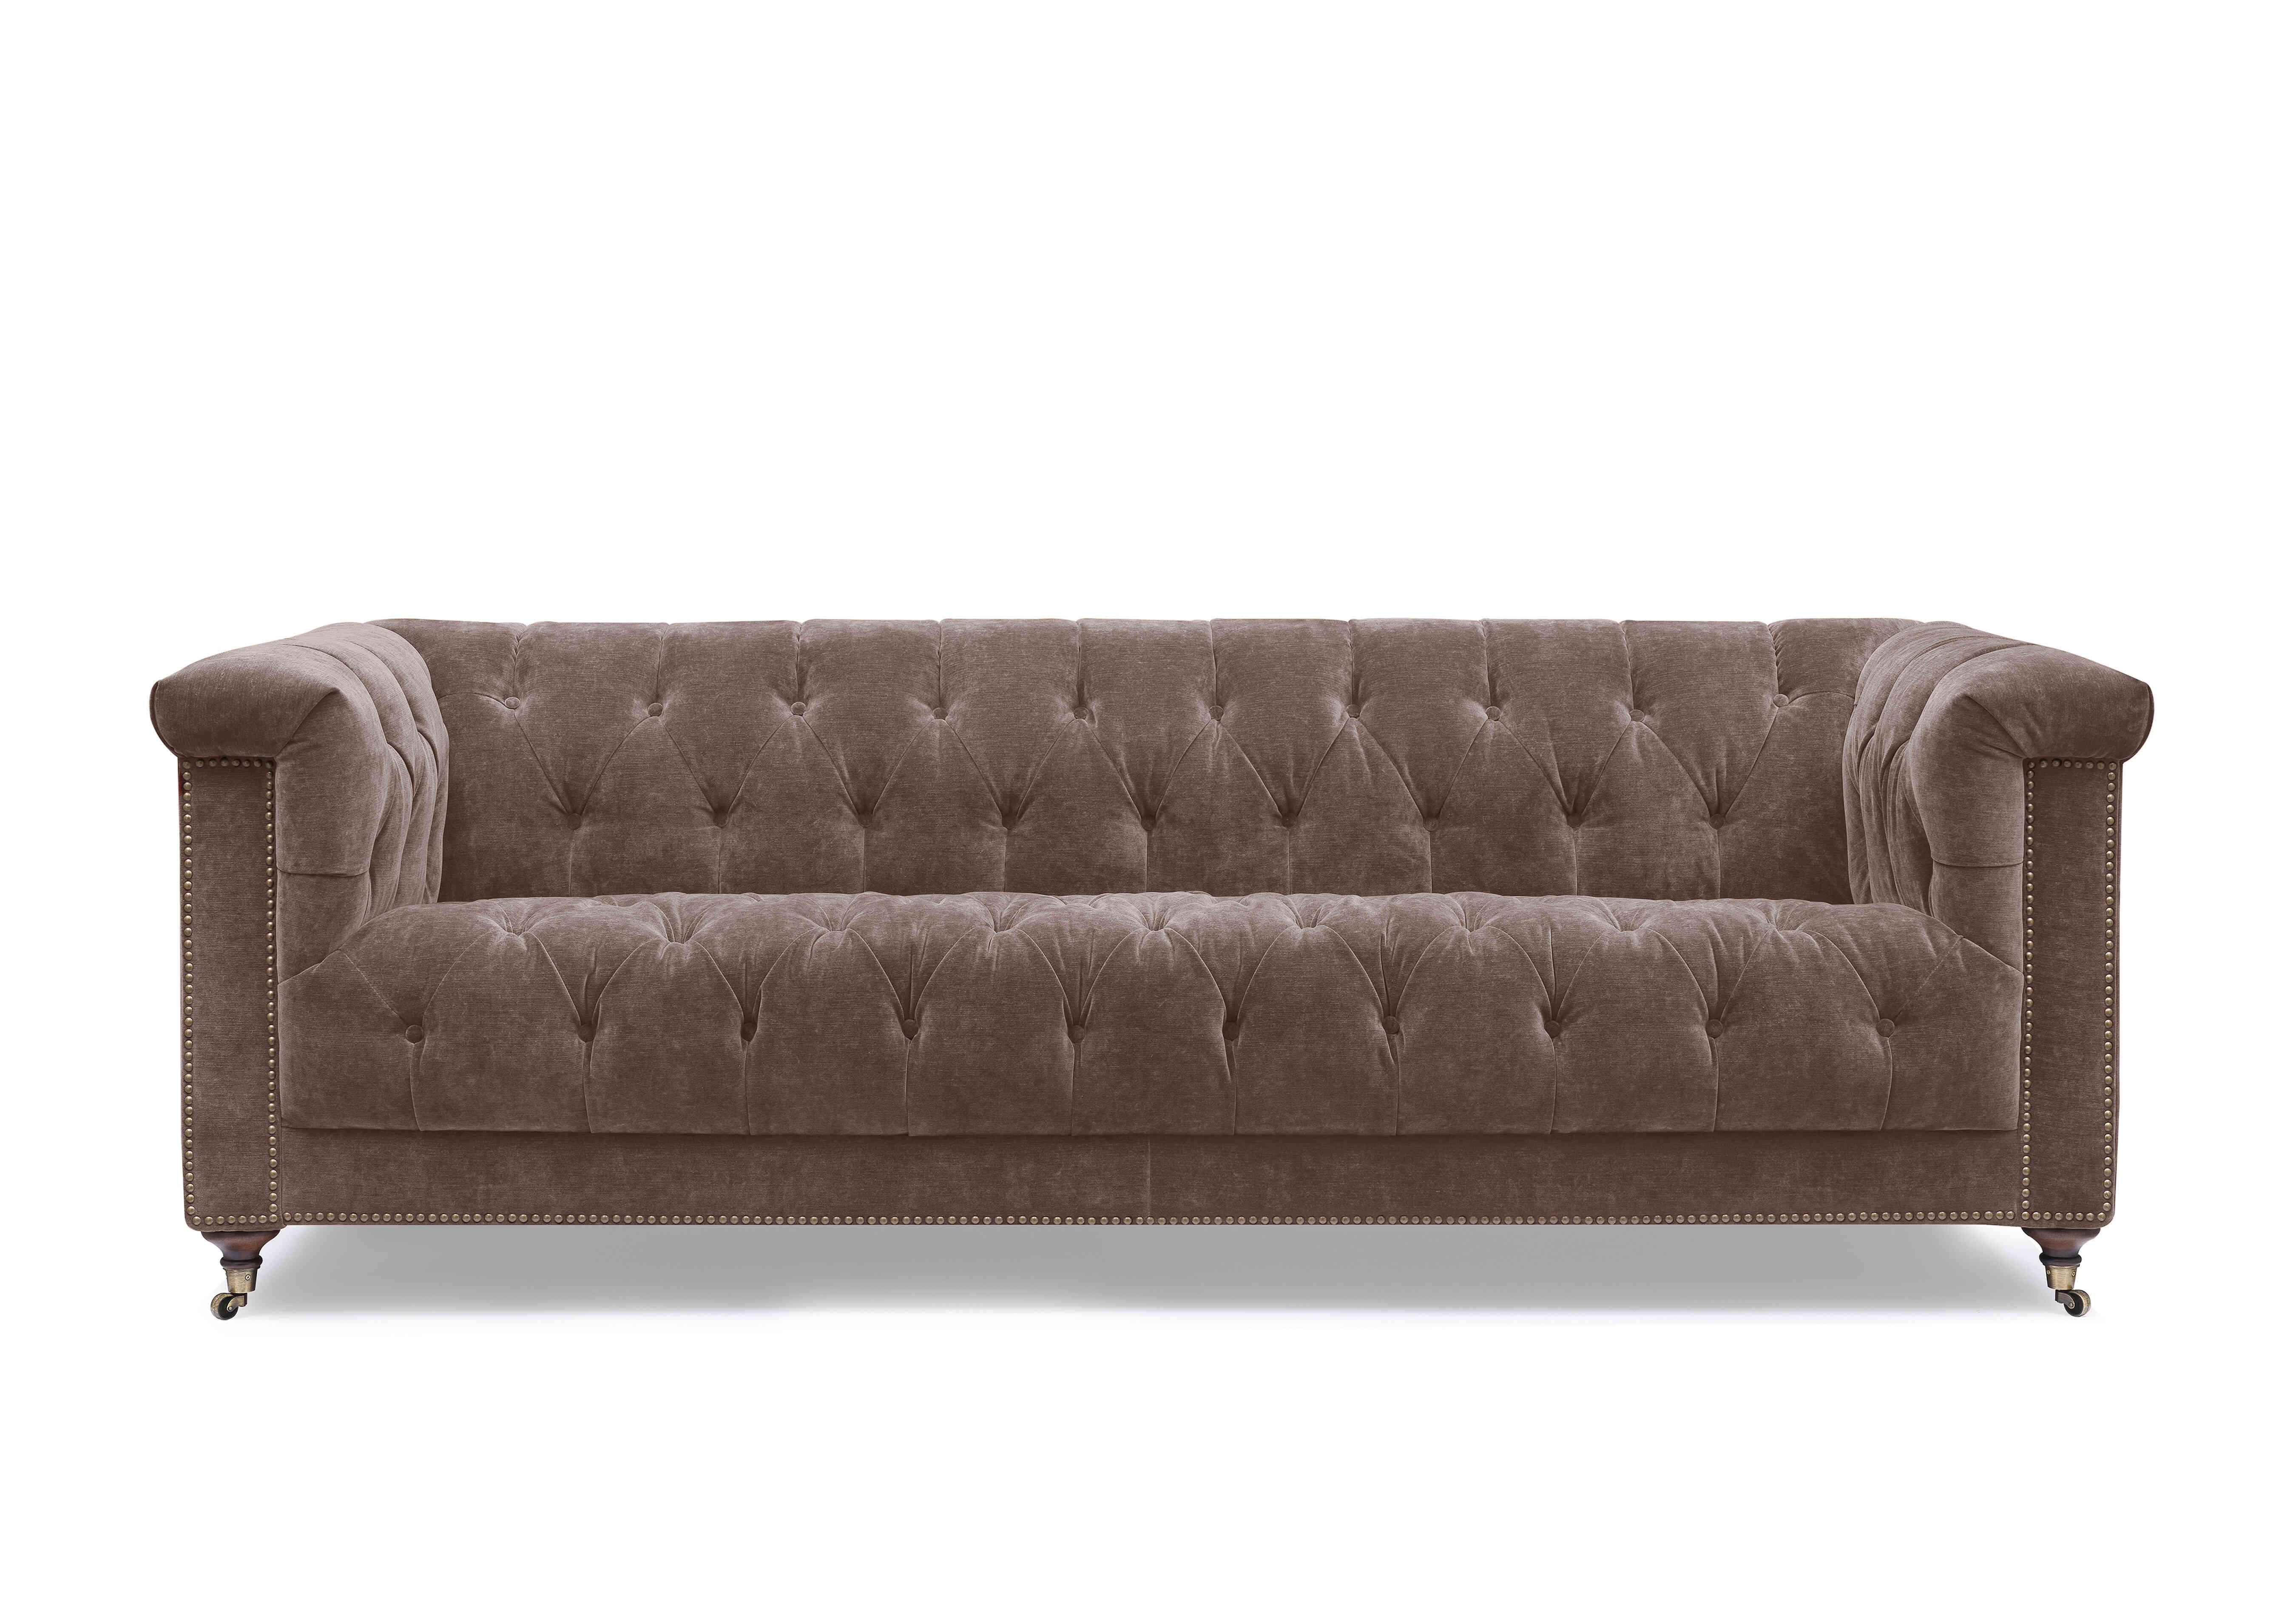 Wallace 4 Seater Fabric Chesterfield Sofa with USB-C in X3y1-W023 Antler on Furniture Village